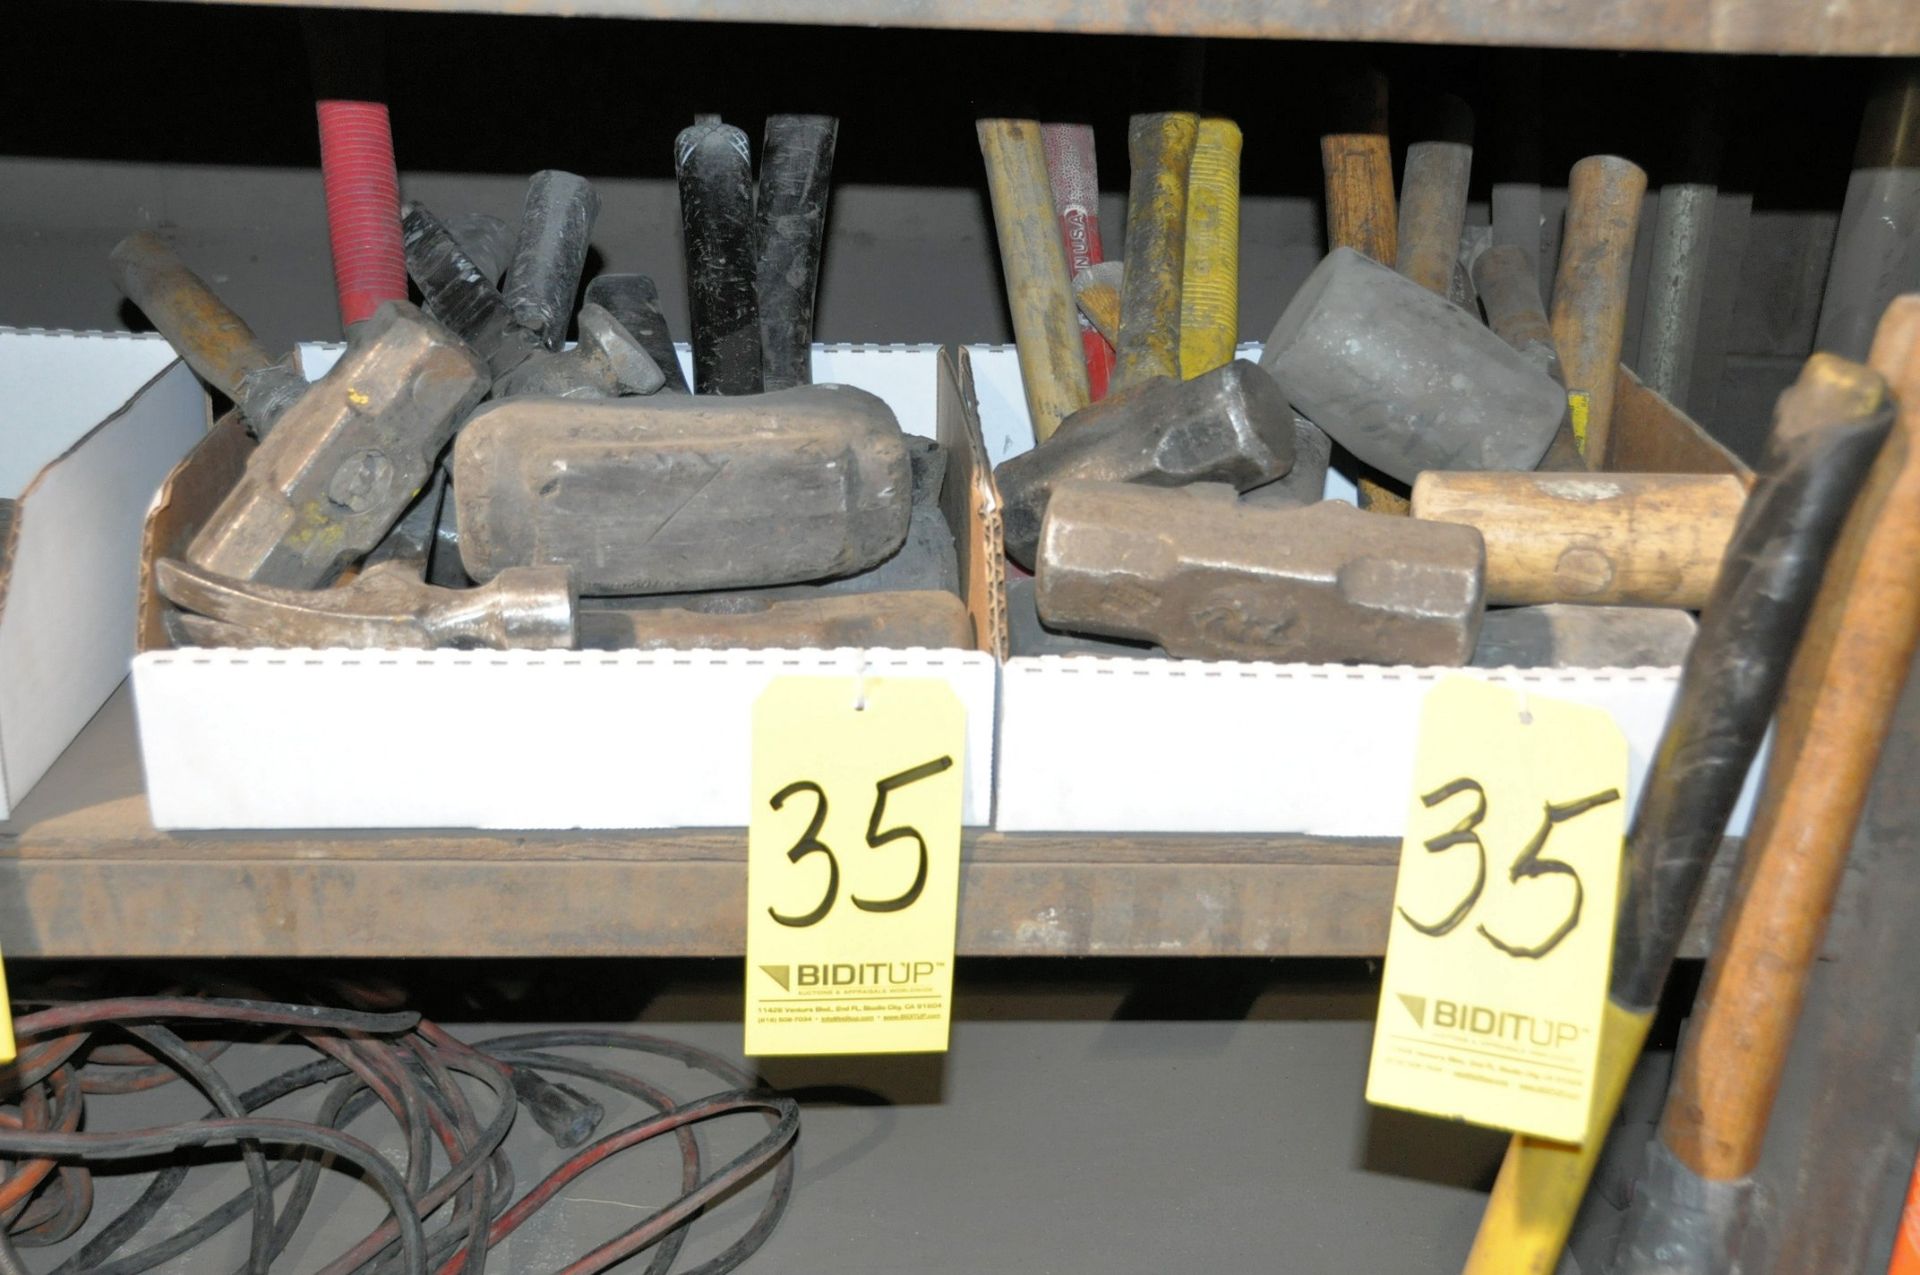 Lot-Asst'd Hammers, Sledge Hammers, Pick and Pry Bars